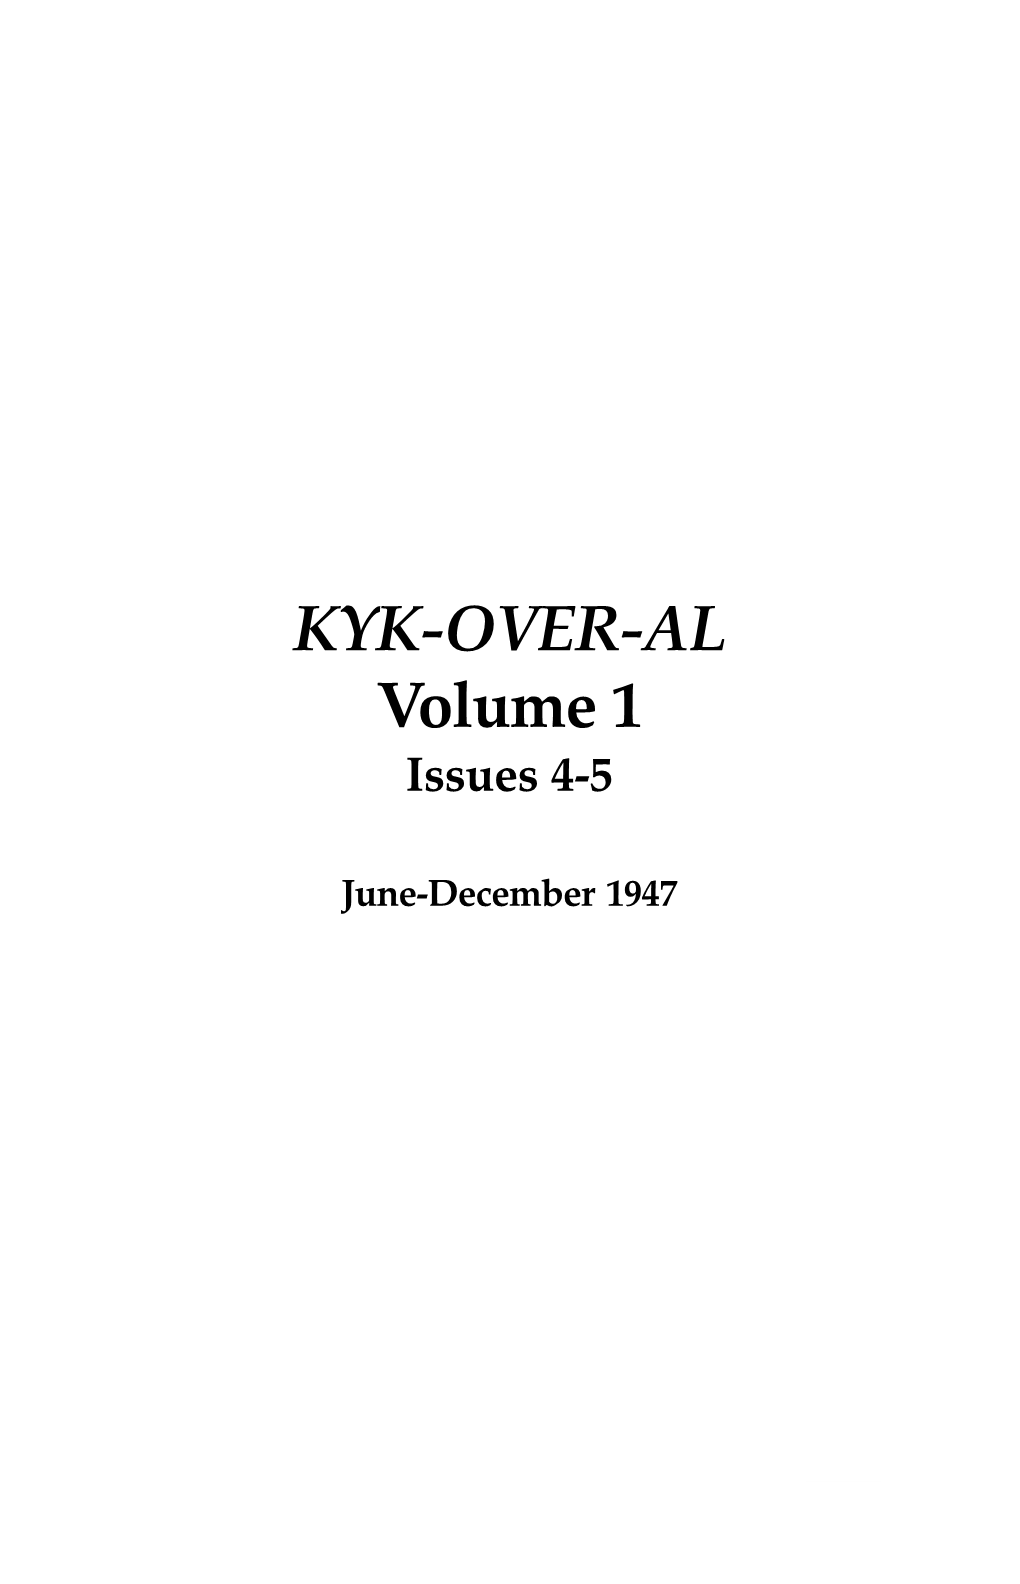 KYK-OVER-AL Volume 1 Issues 4-5